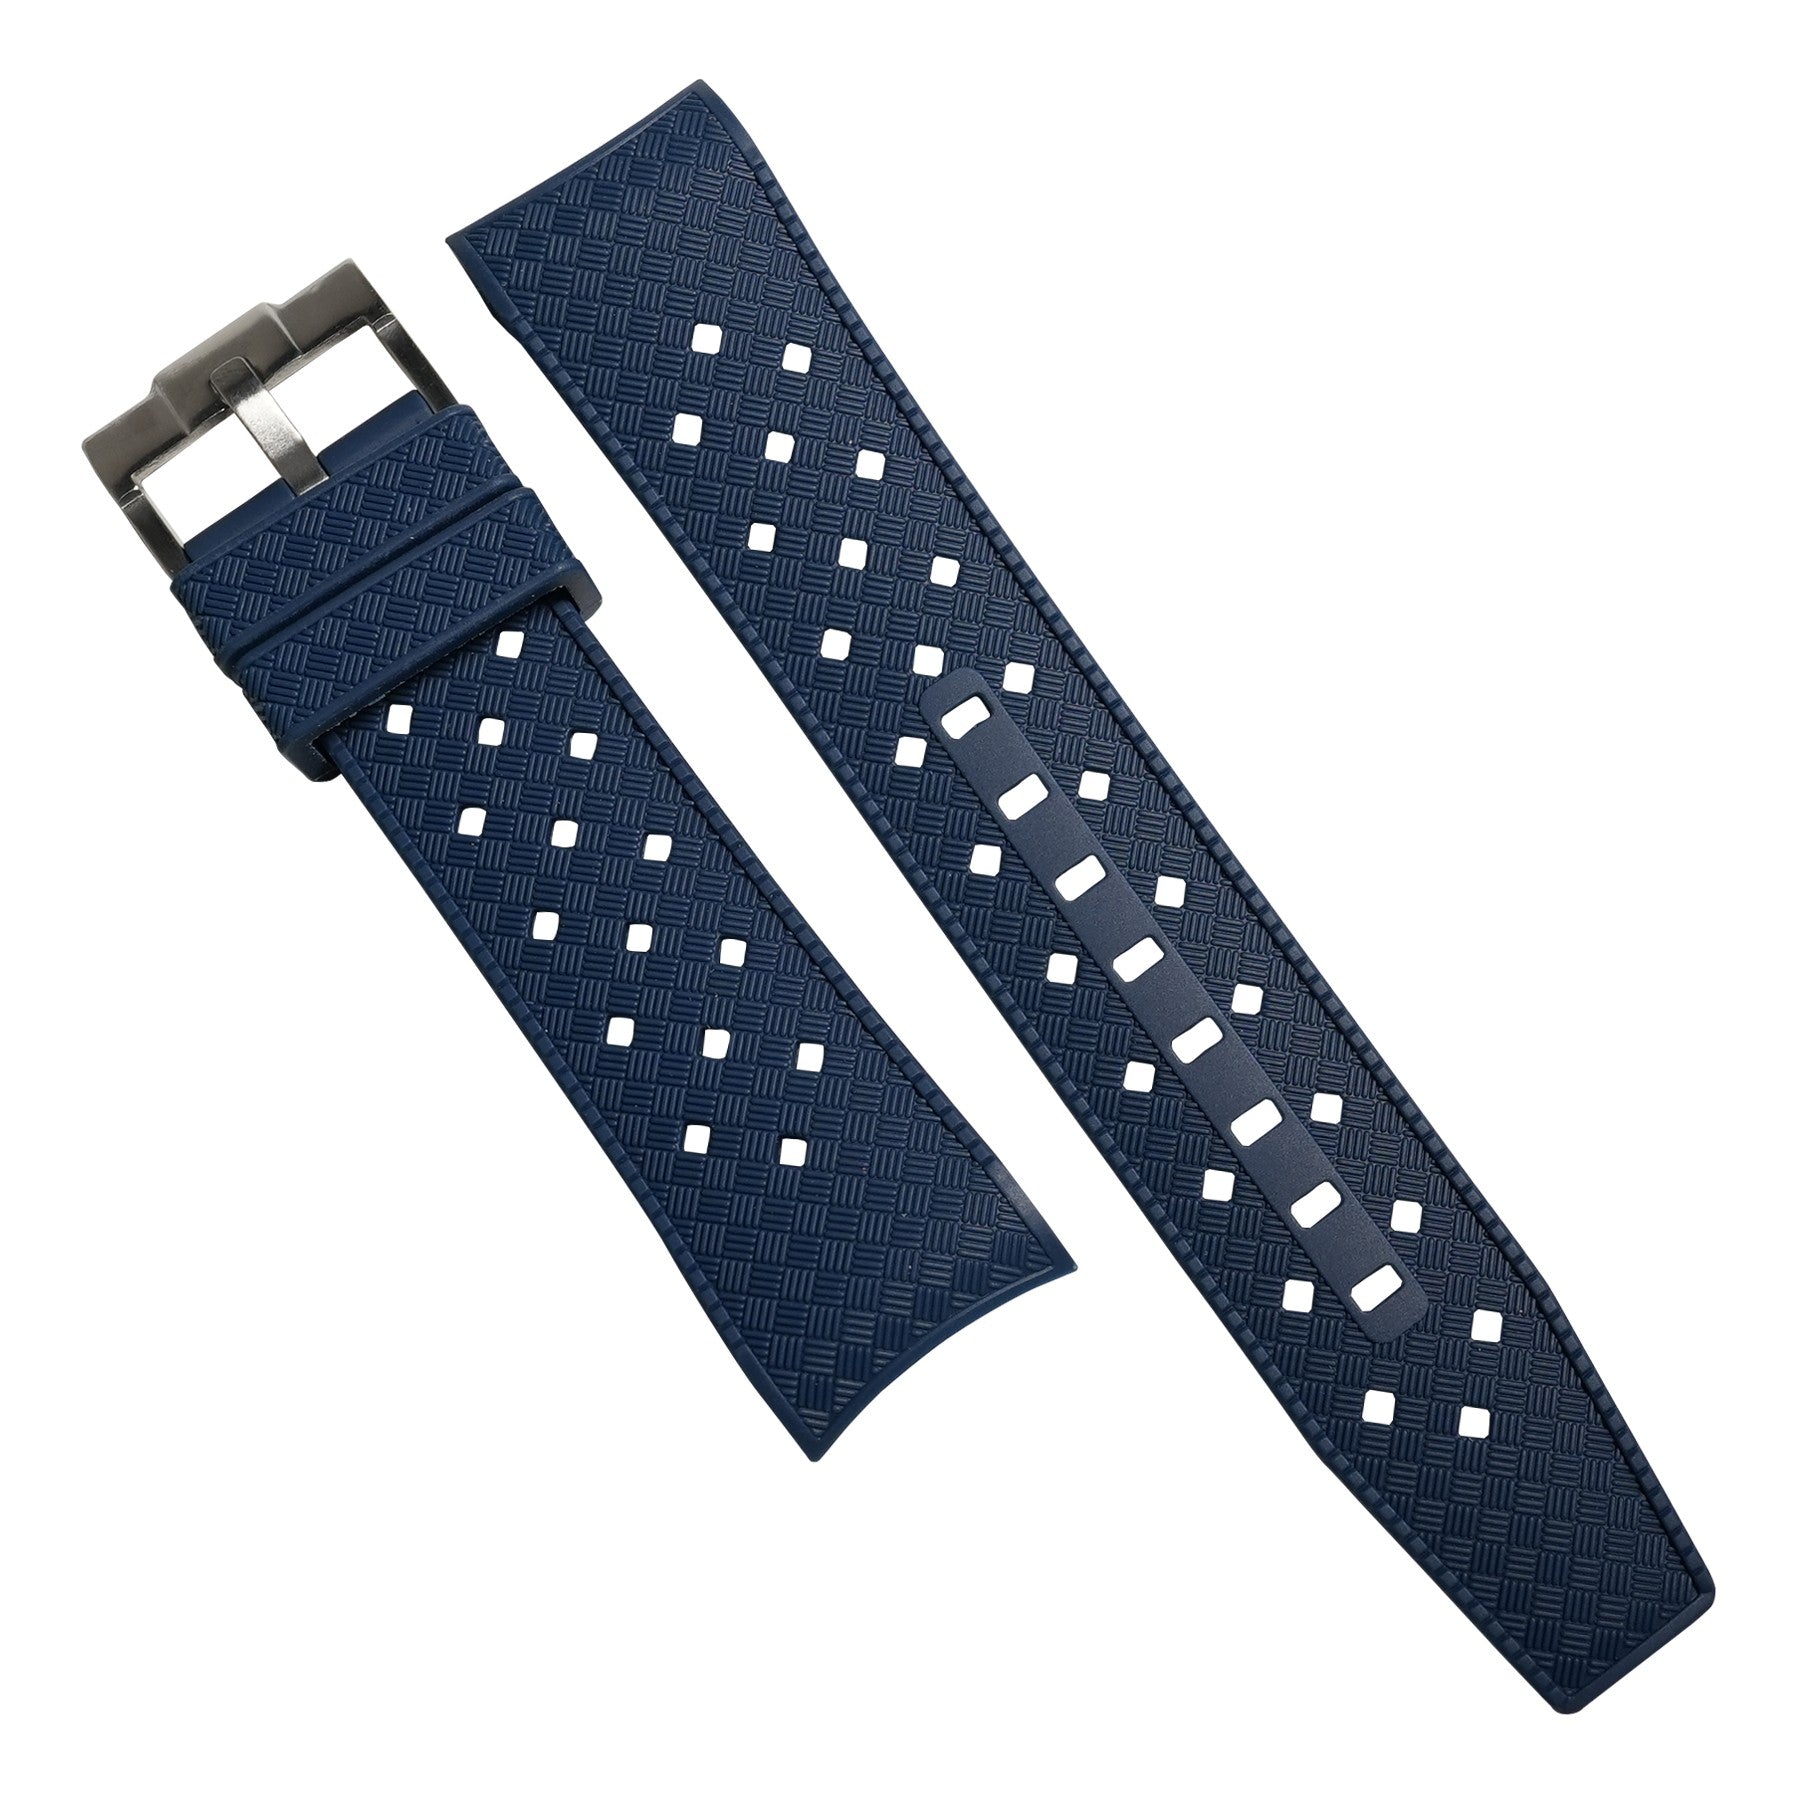 Tropic Curved End Rubber Strap for Blancpain x Swatch Scuba Fifty Fathoms in Navy - Nomad Watch Works SG